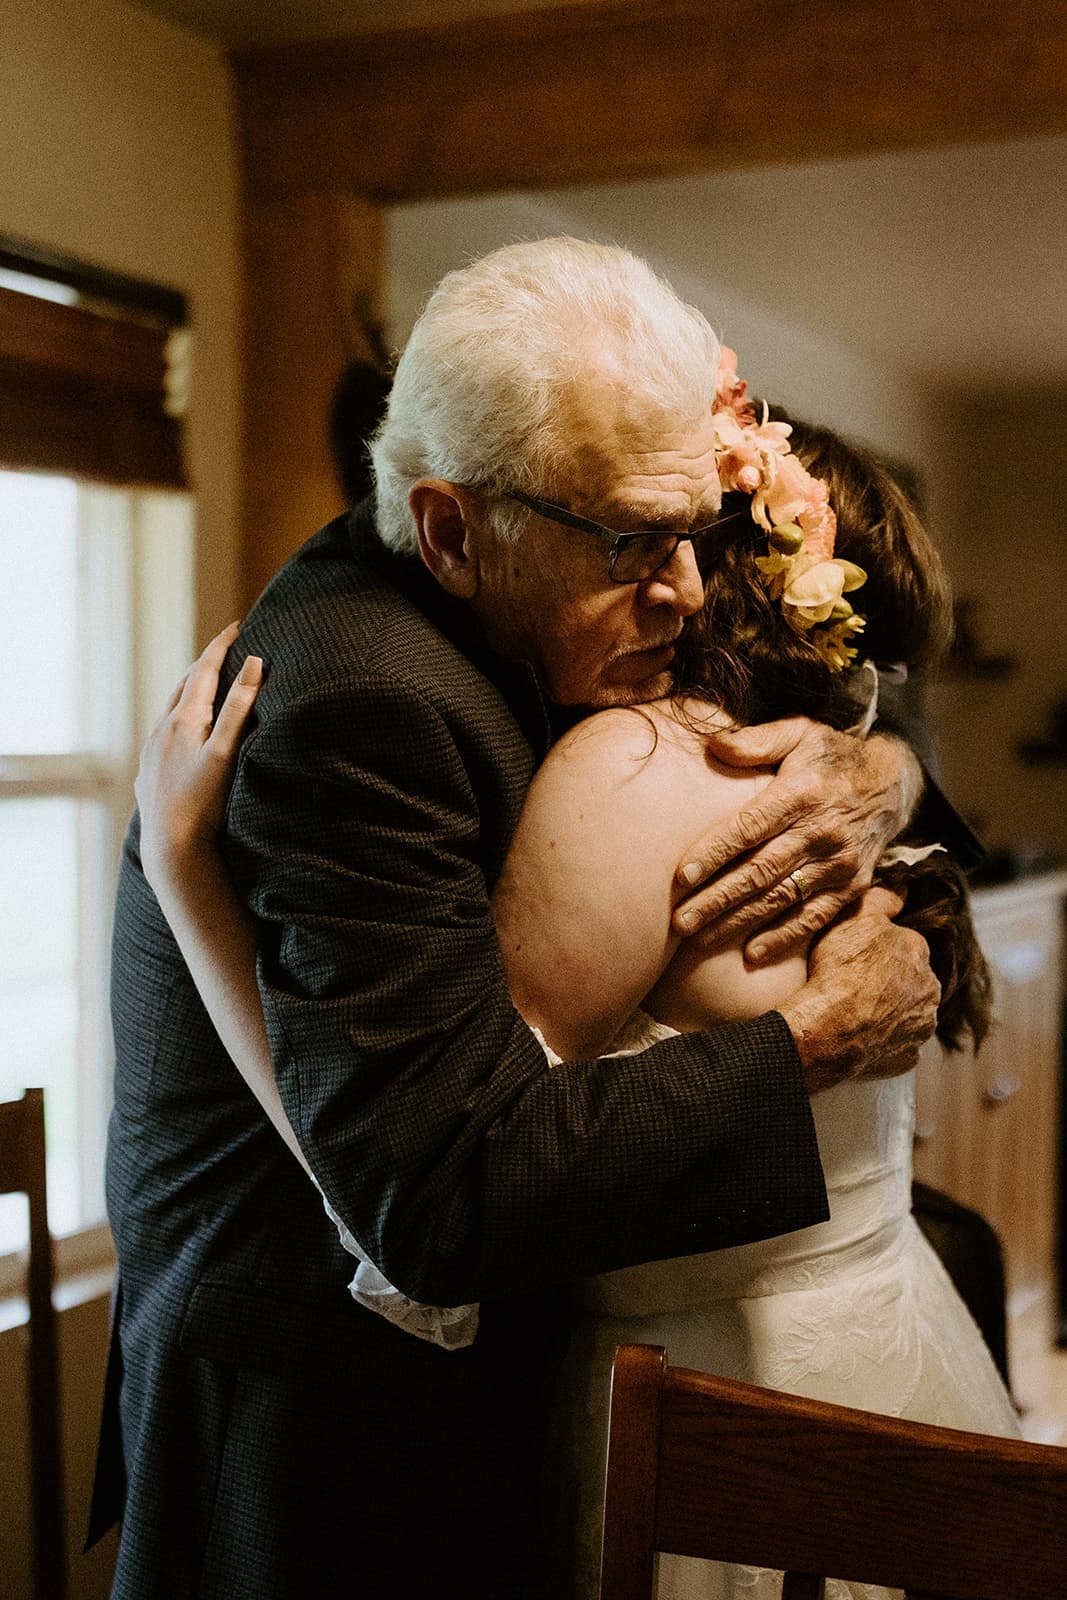 An elderly man embraces a woman in a wedding dress and flower crown